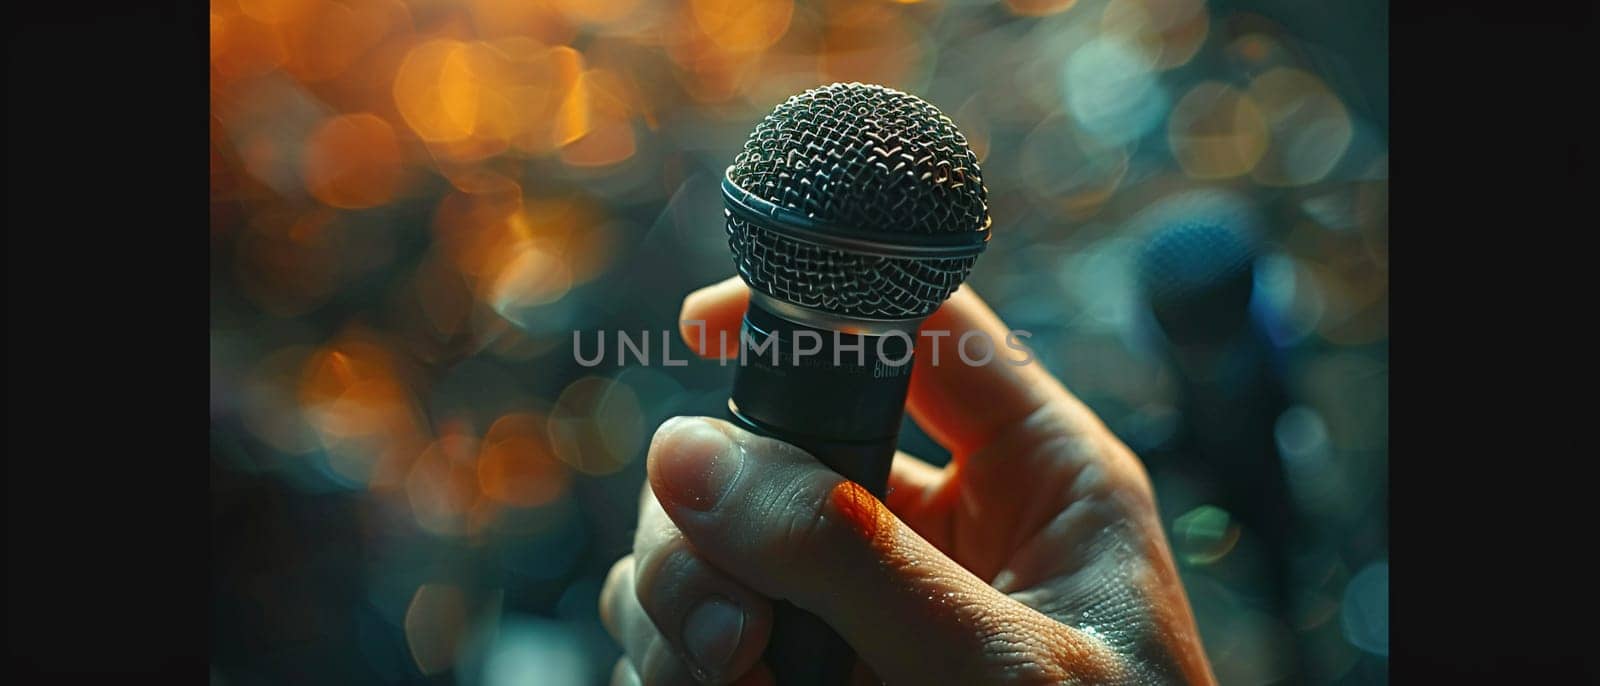 Hand holding a microphone, capturing expression, communication, and performance.